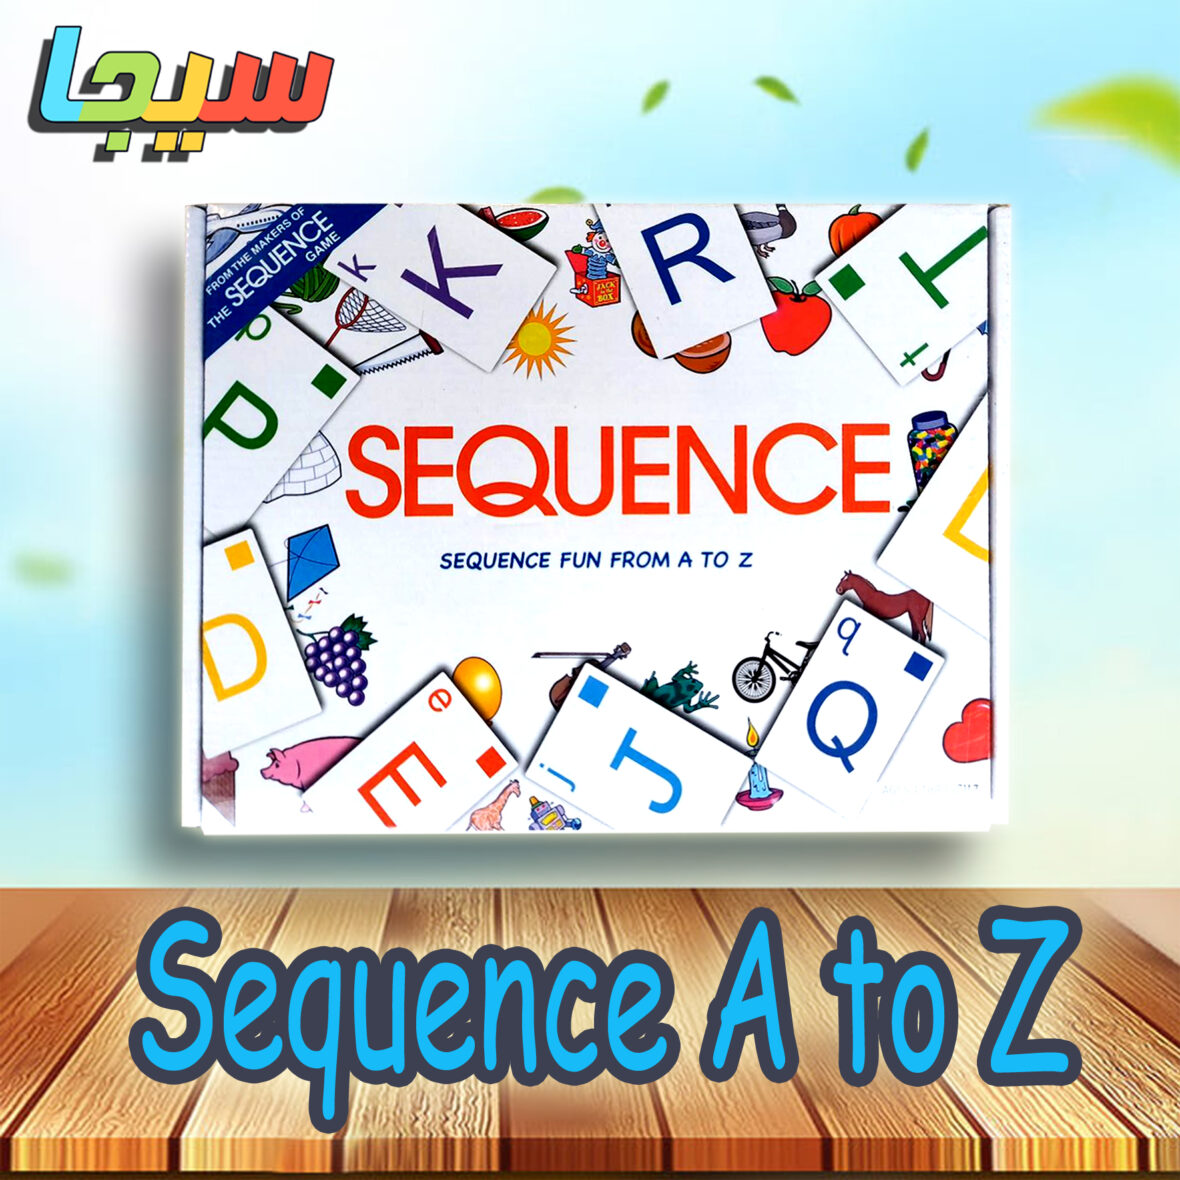 Sequence A to Z